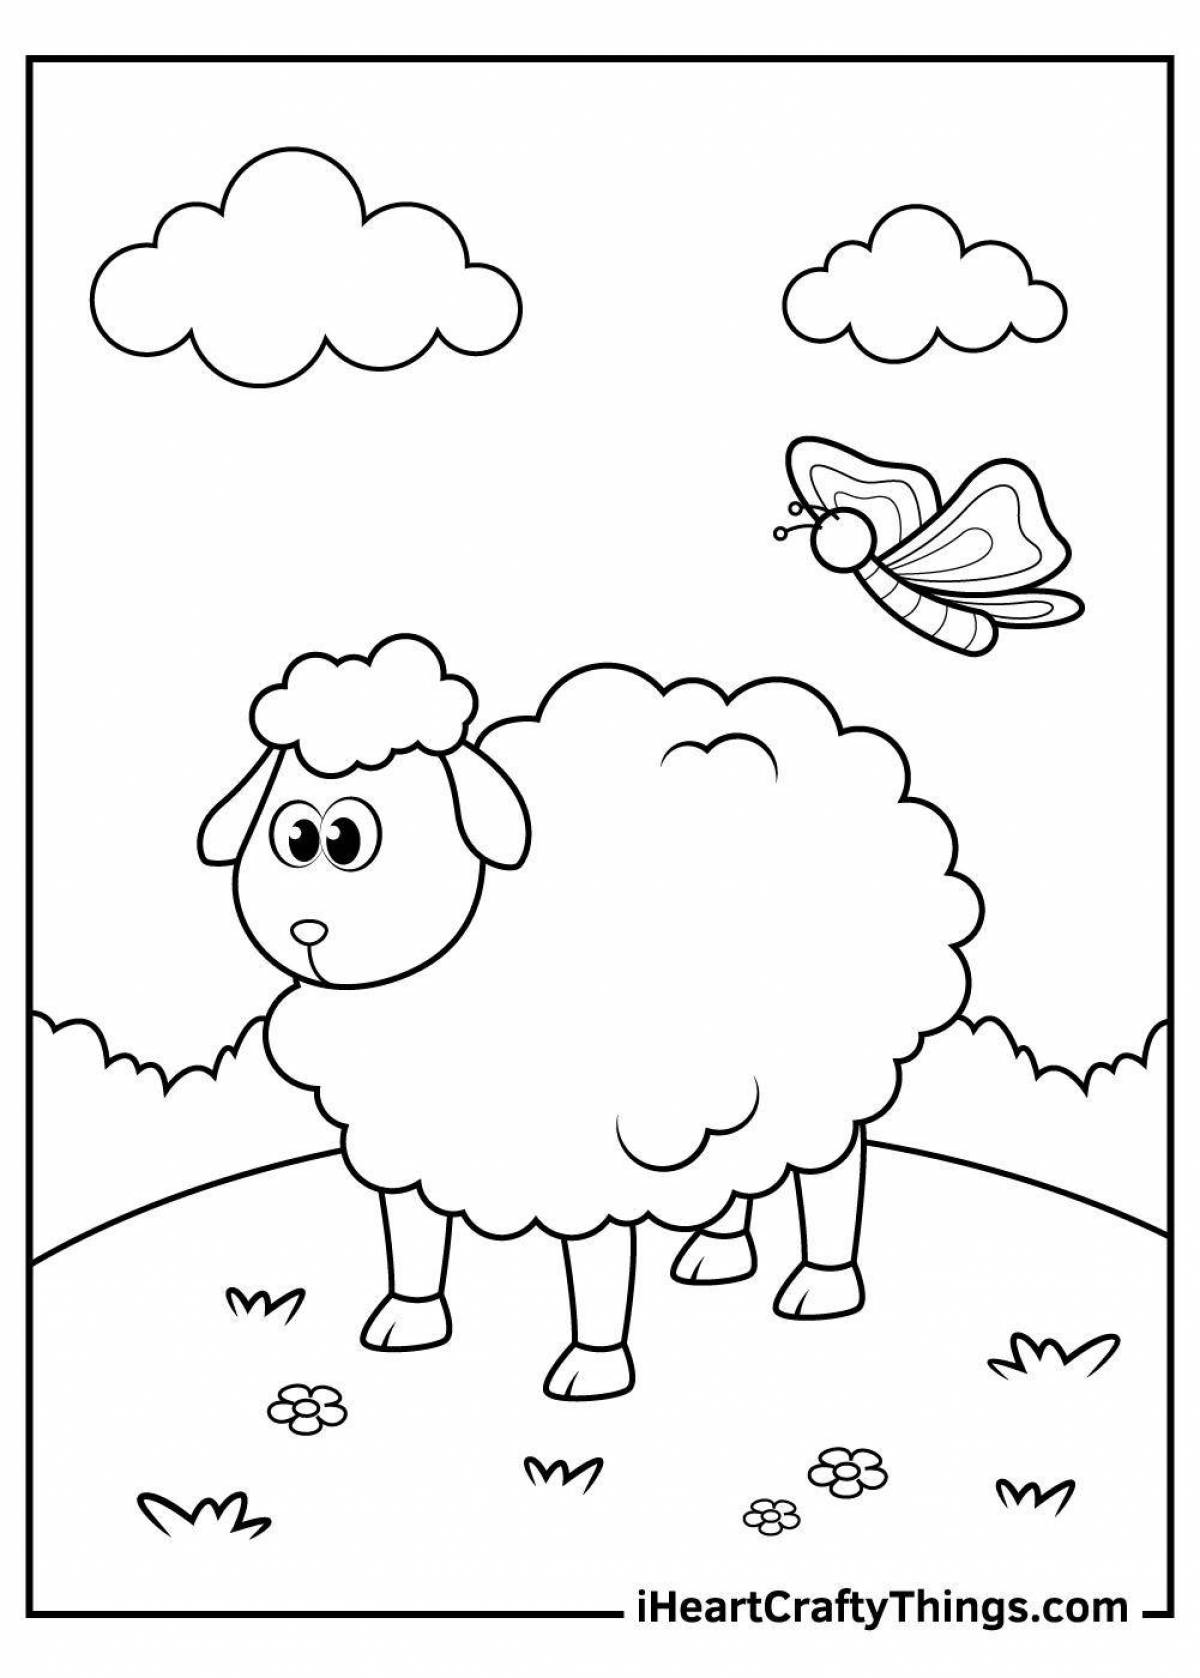 Glowing sheep coloring book for 2-3 year olds